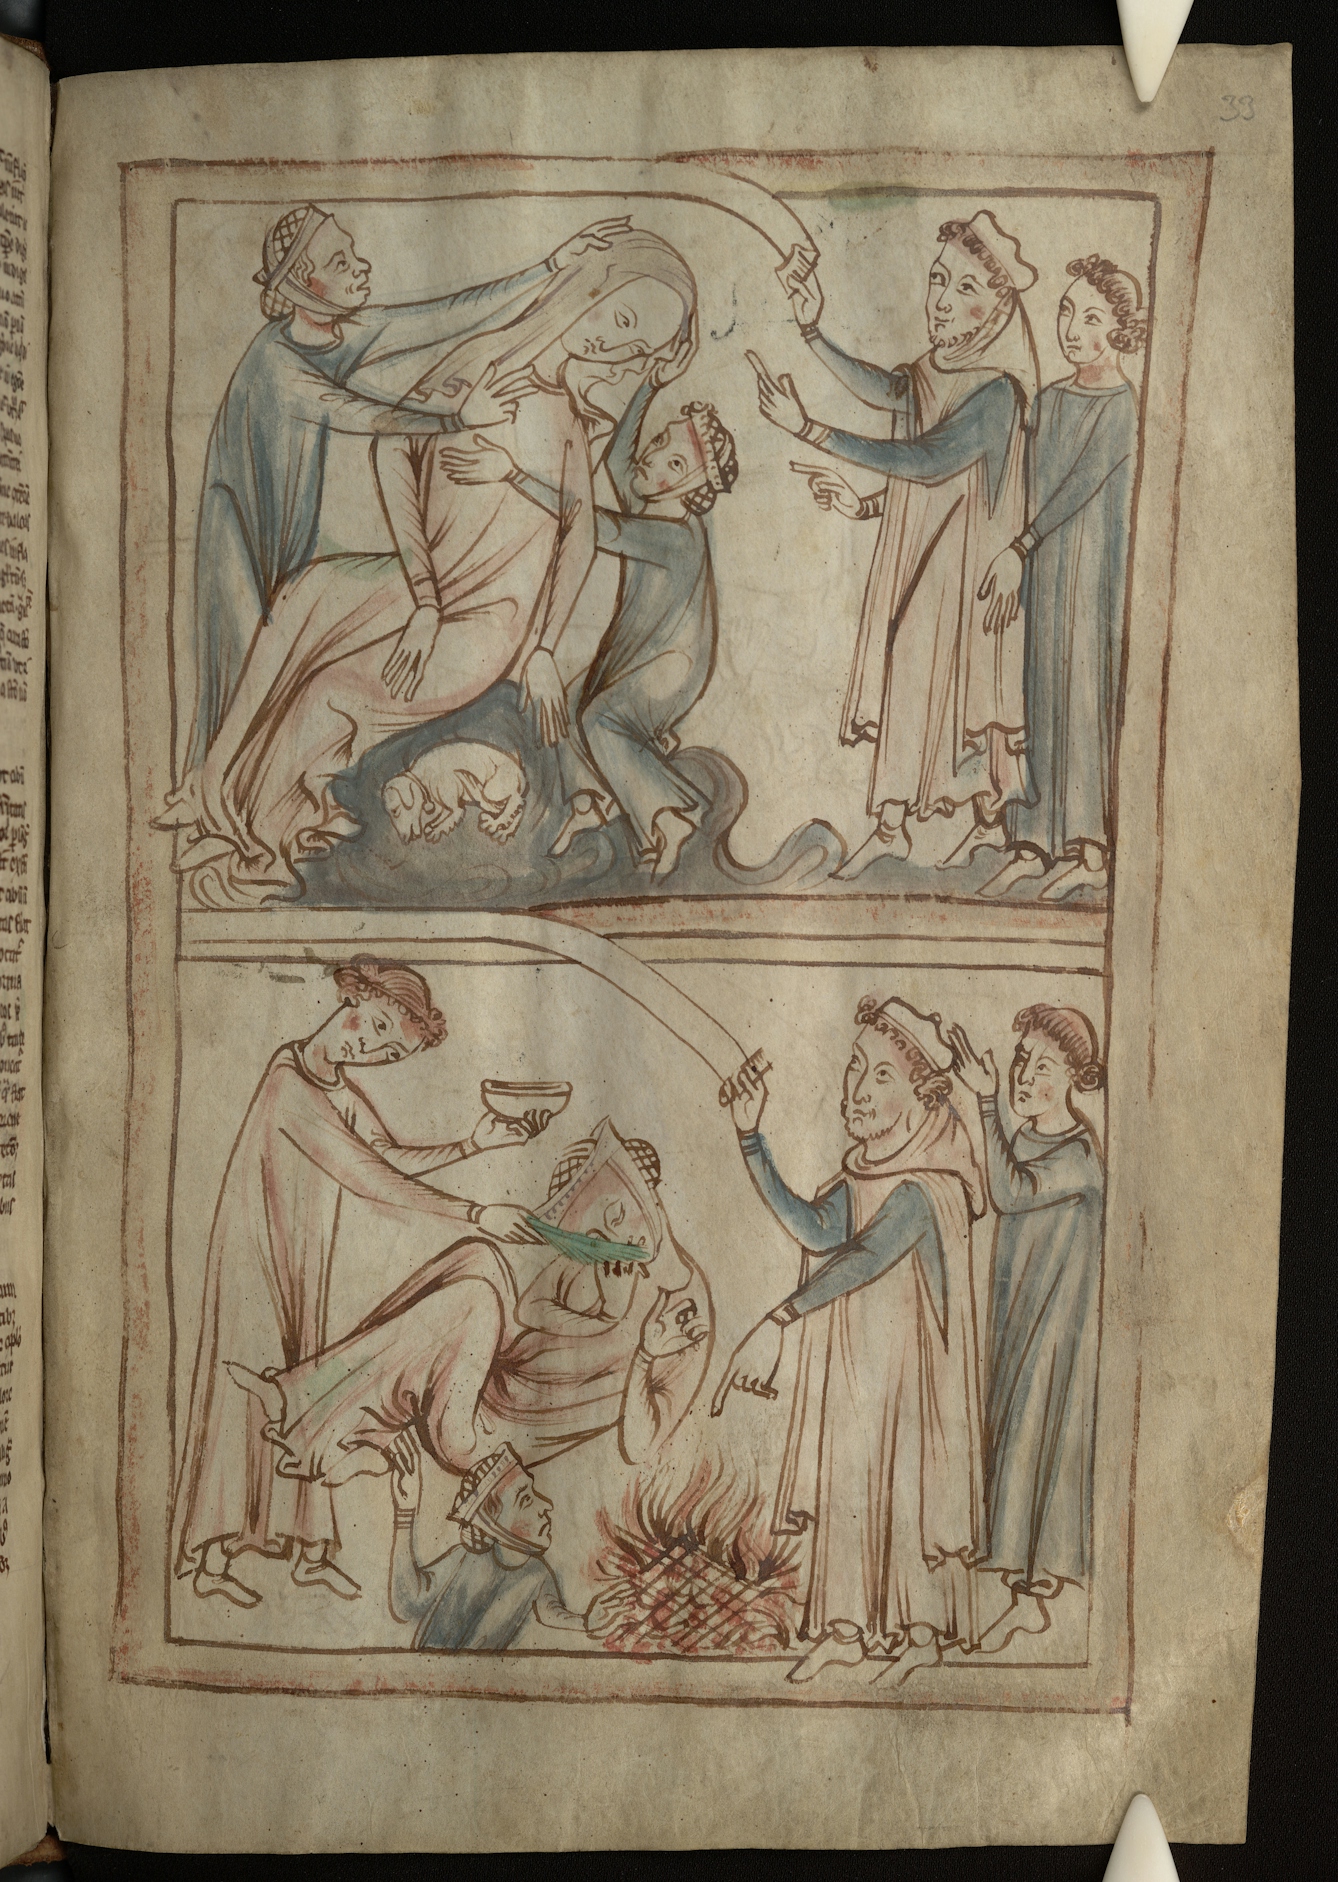 Medieval line drawing in two frames. The top frame shows a woman fainting and two people trying to catch her and support her down, as two others watch. In the second frame below, they appear to be trying to revive her with fire and by feeding her something from a bowl.